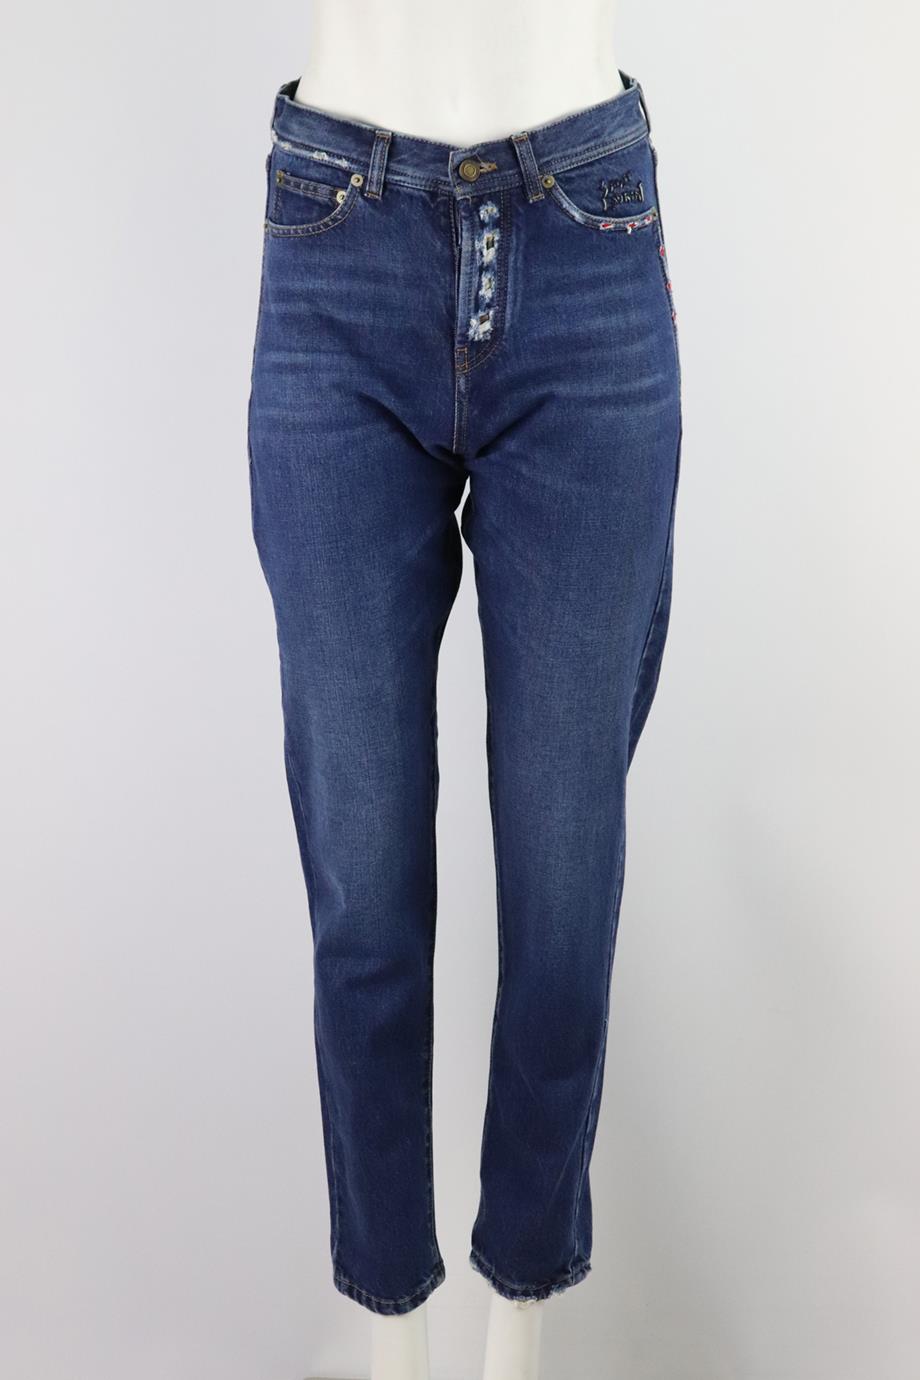 SAINT LAURENT EMBROIDERED HIGH RISE STRAIGHT LEG JEANS W27 UK 8/10